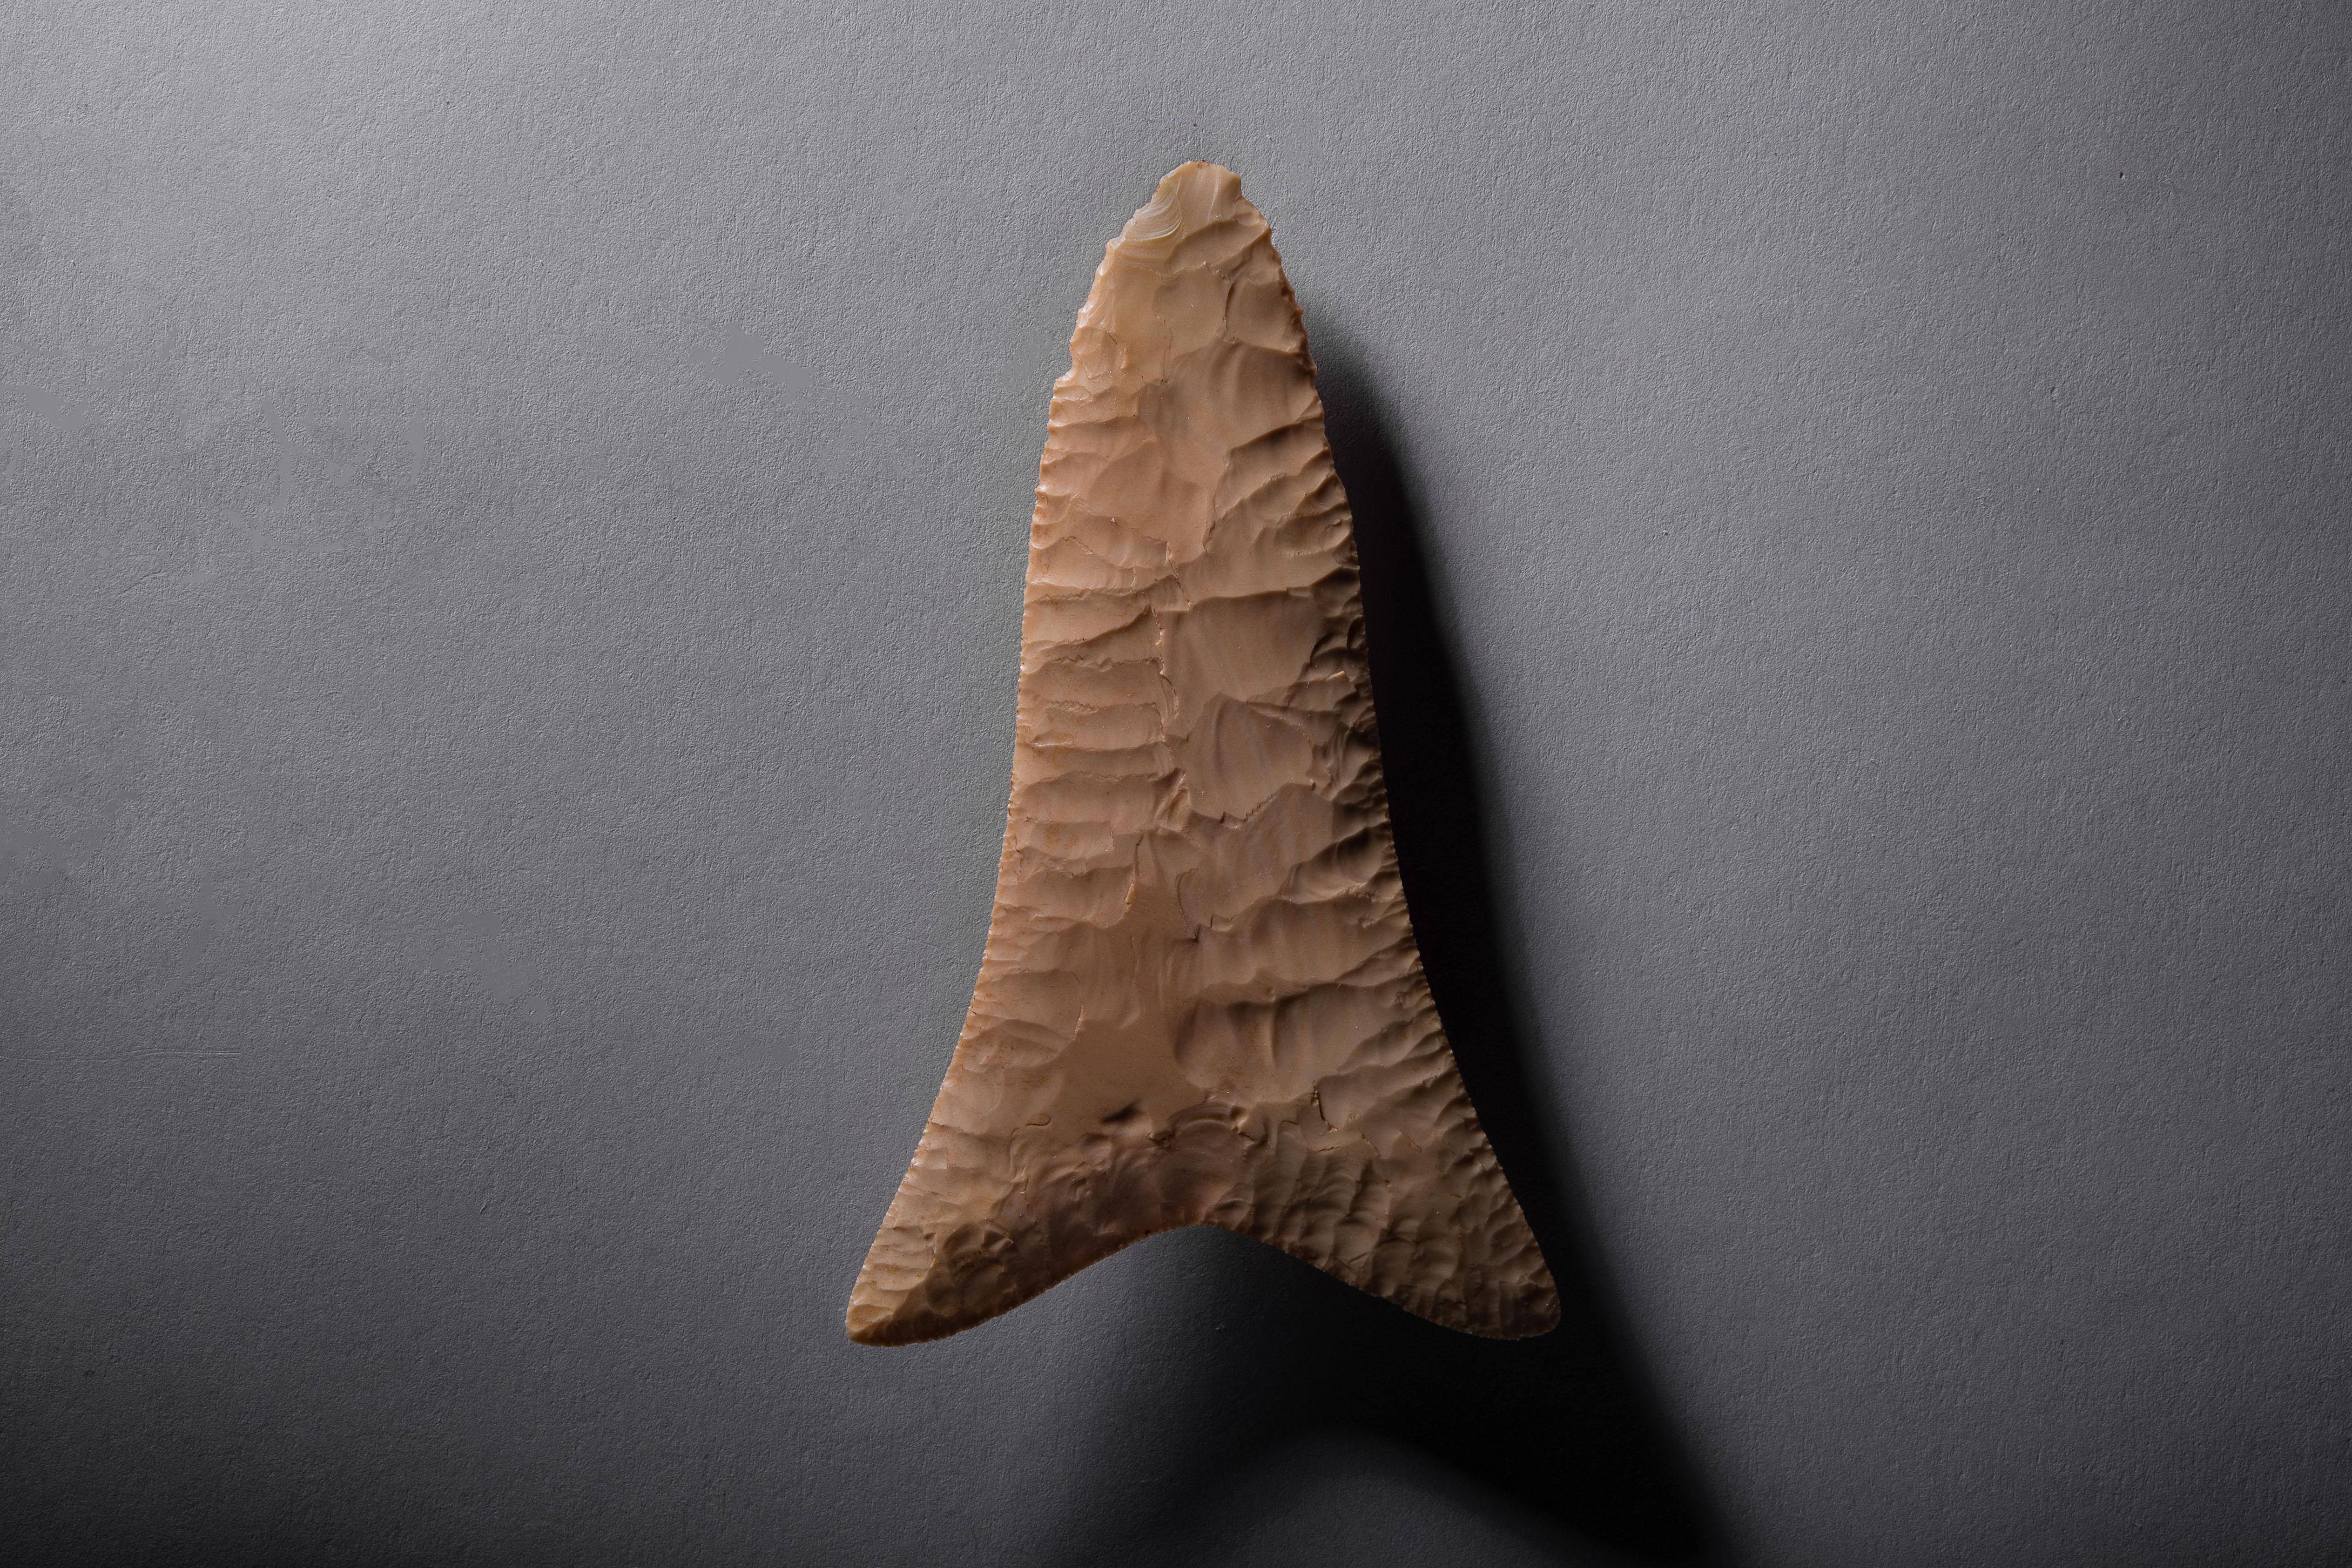 Ancient Egyptian Flint Knife
Predynastic period, Naqada I-II, 4th millennium B.C.
Flint

This exquisite fish-tail knife is an extraordinary example of Predynastic flint workmanship. The blade is thin and tactile with delicate saw-like teeth. The